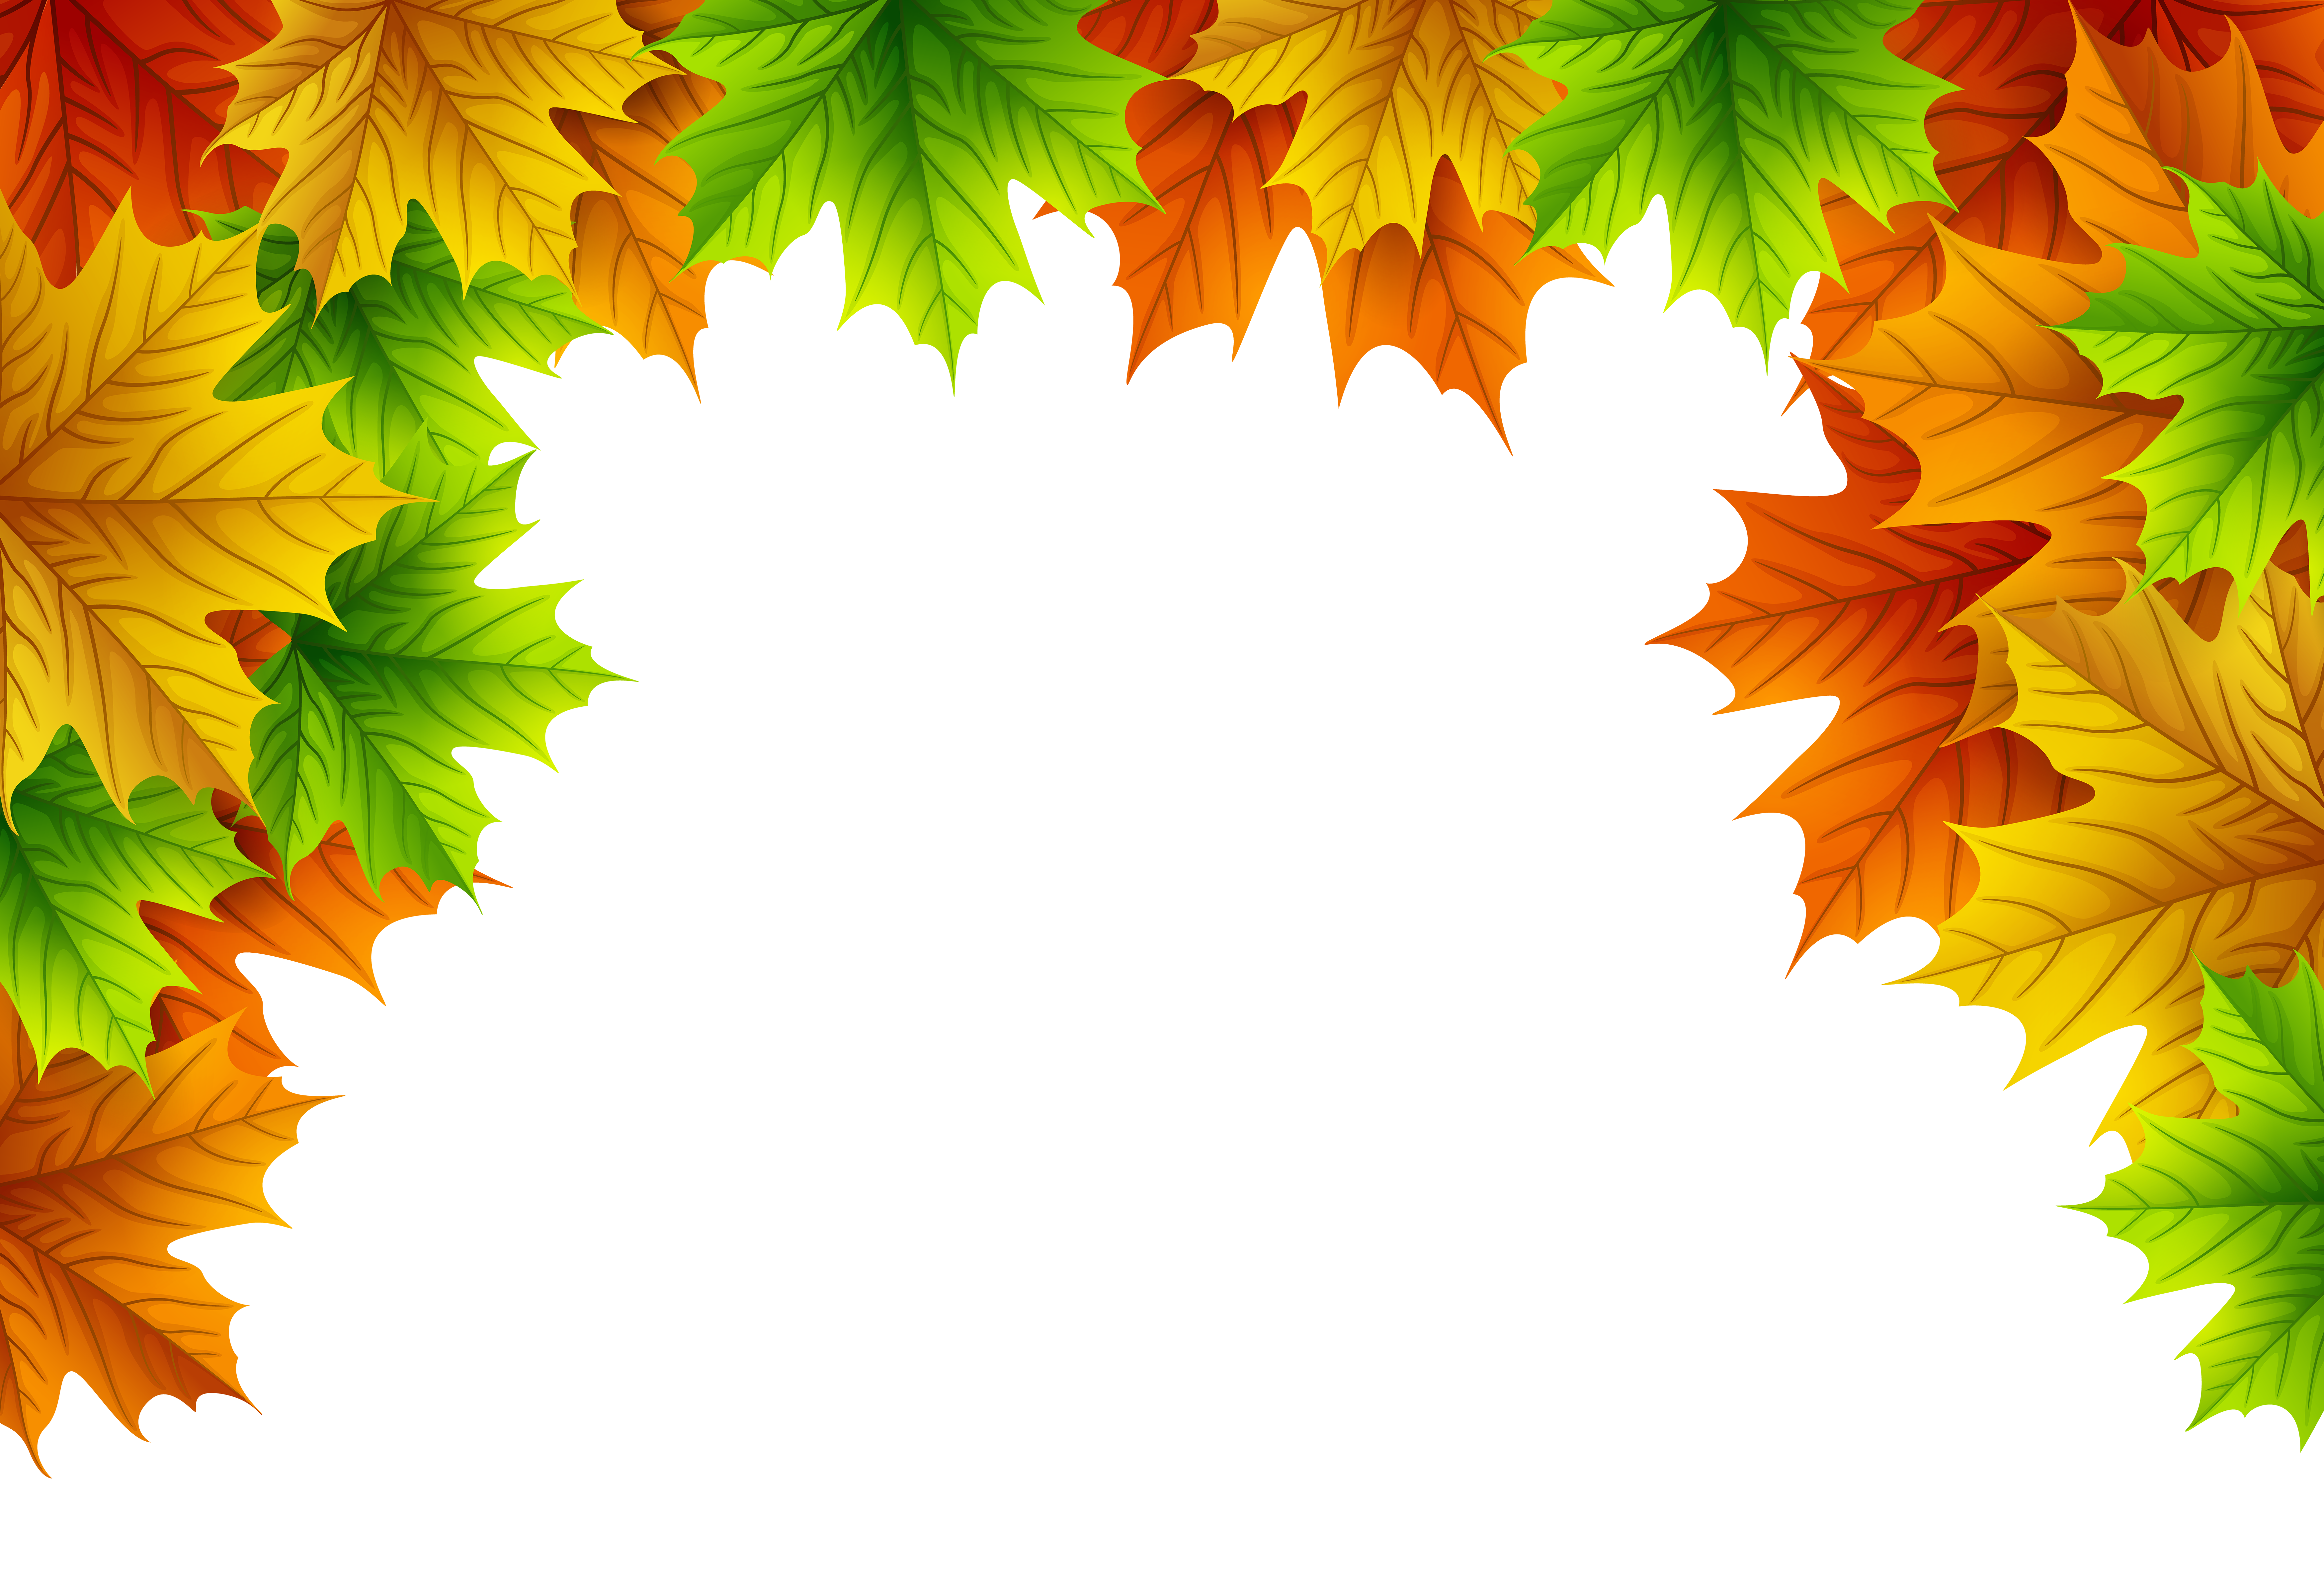 Autumn Leaves Decorative Top Border PNG Image​-Quality Image and Transparent PNG Free Clipart